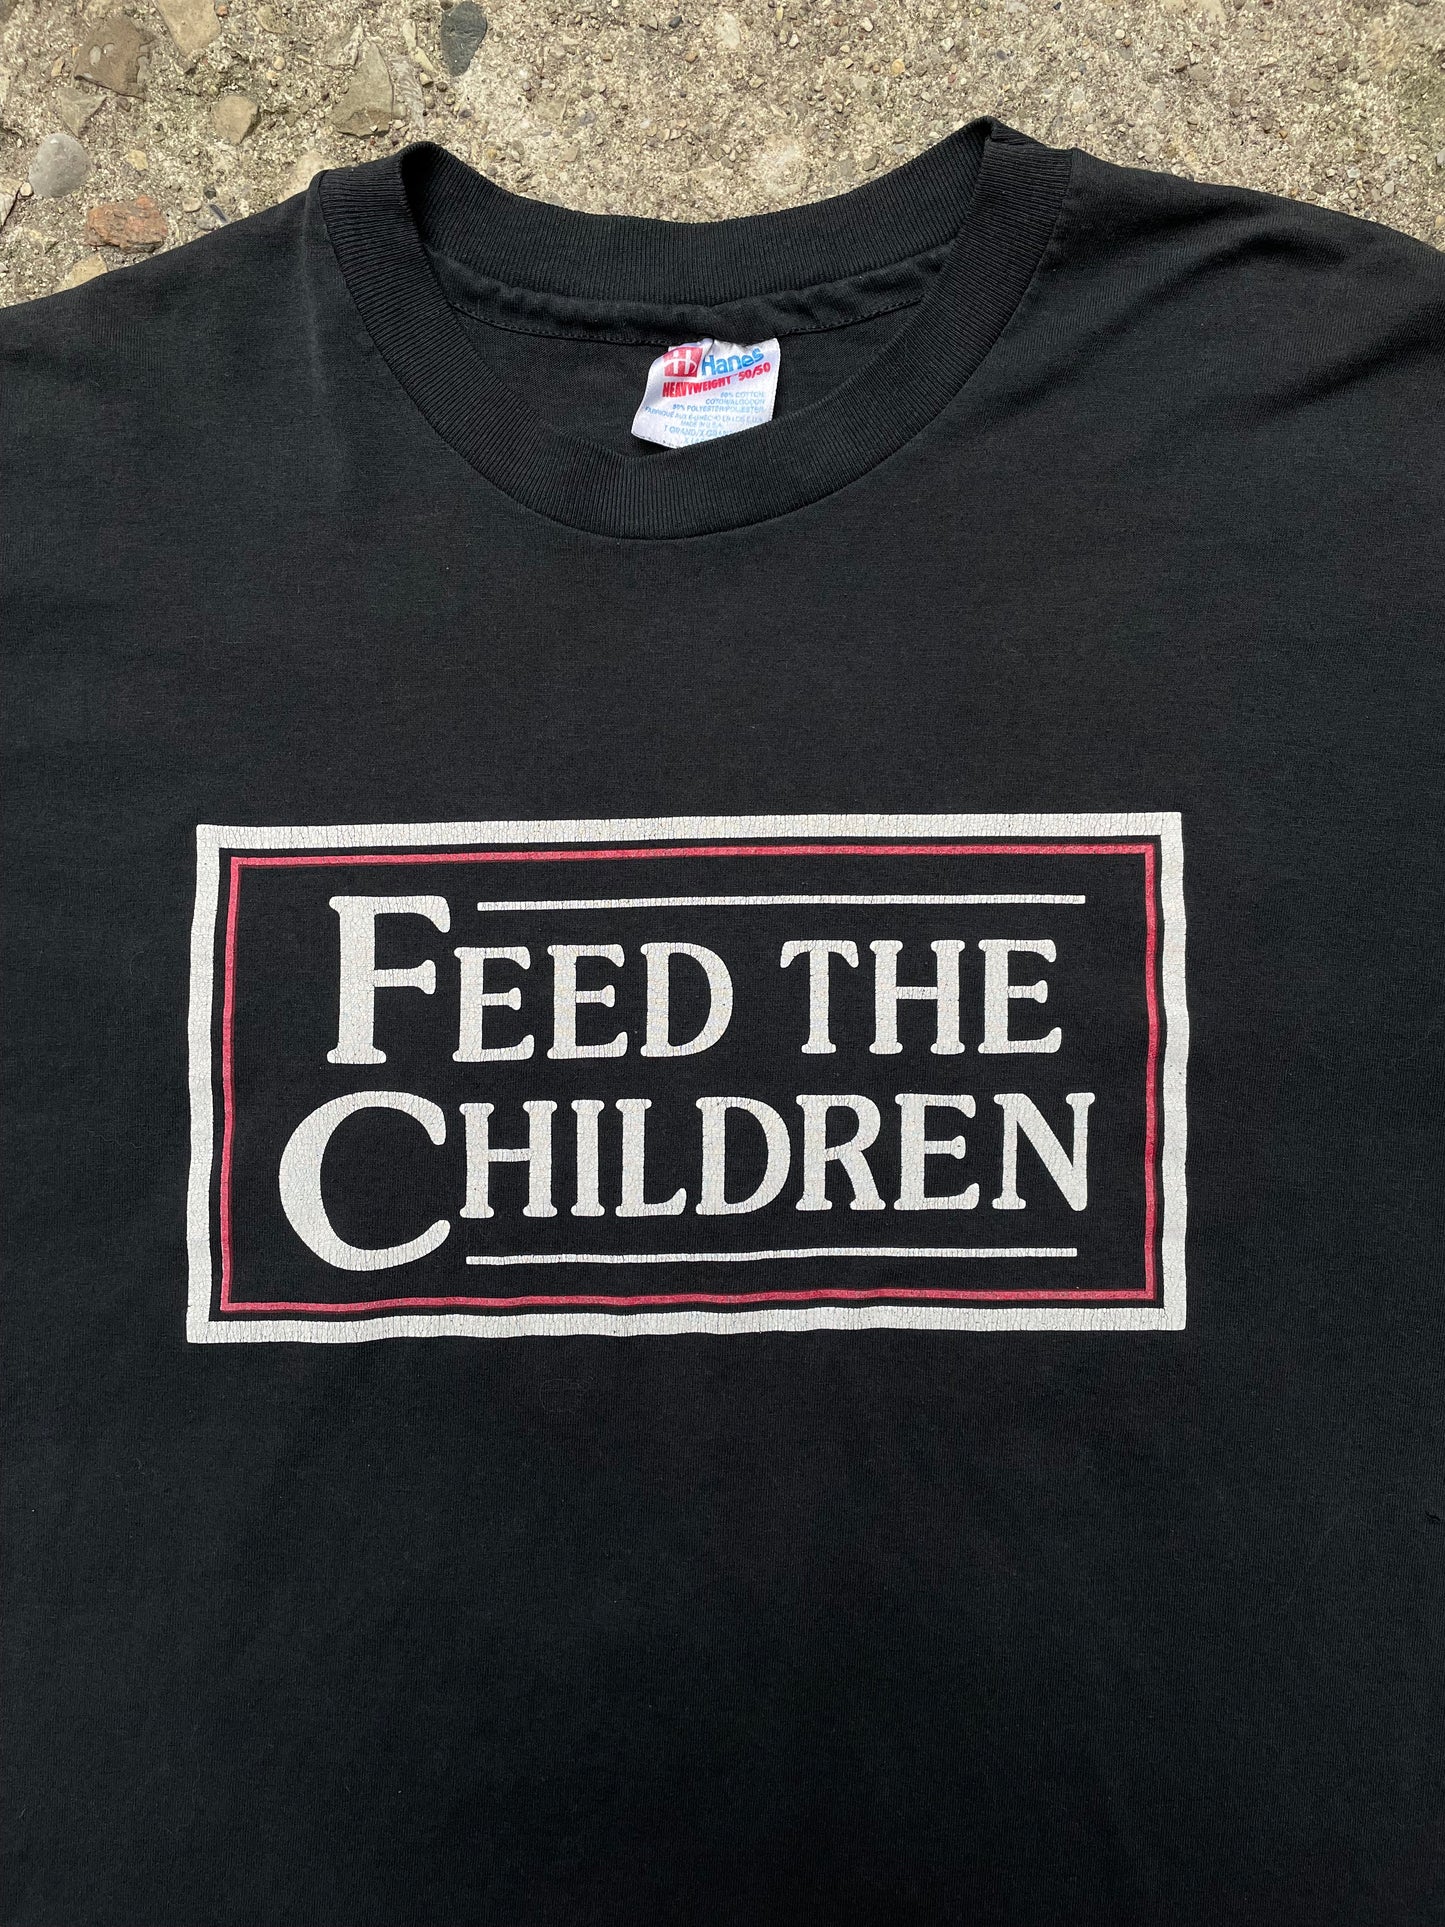 1990's 'Feed the Children' Graphic T-Shirt - XL